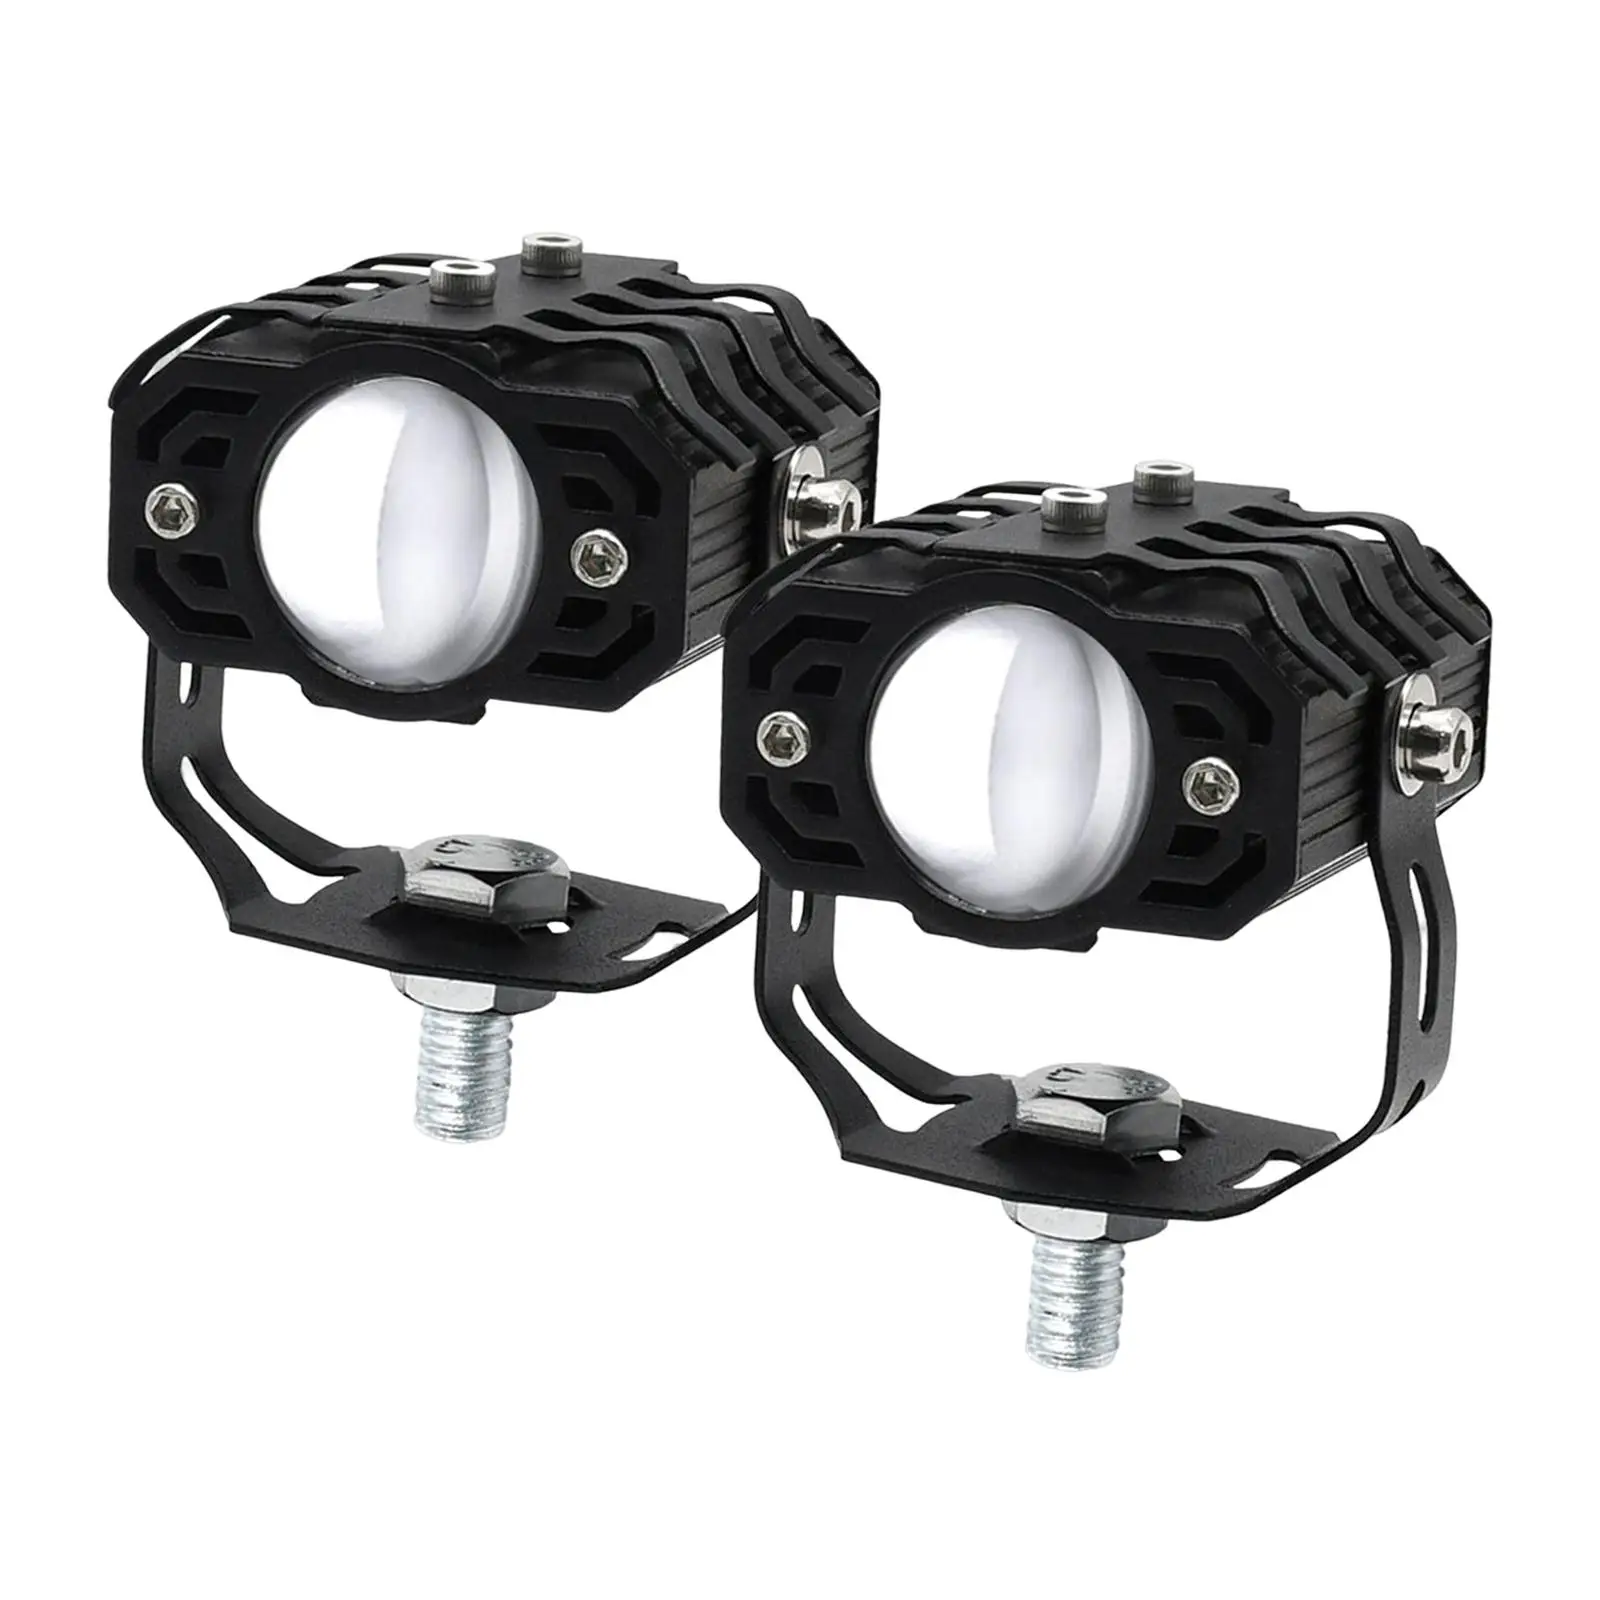 2x Motorcycle Auxiliary Driving Lights Spotlight Fog Light for SUV Car